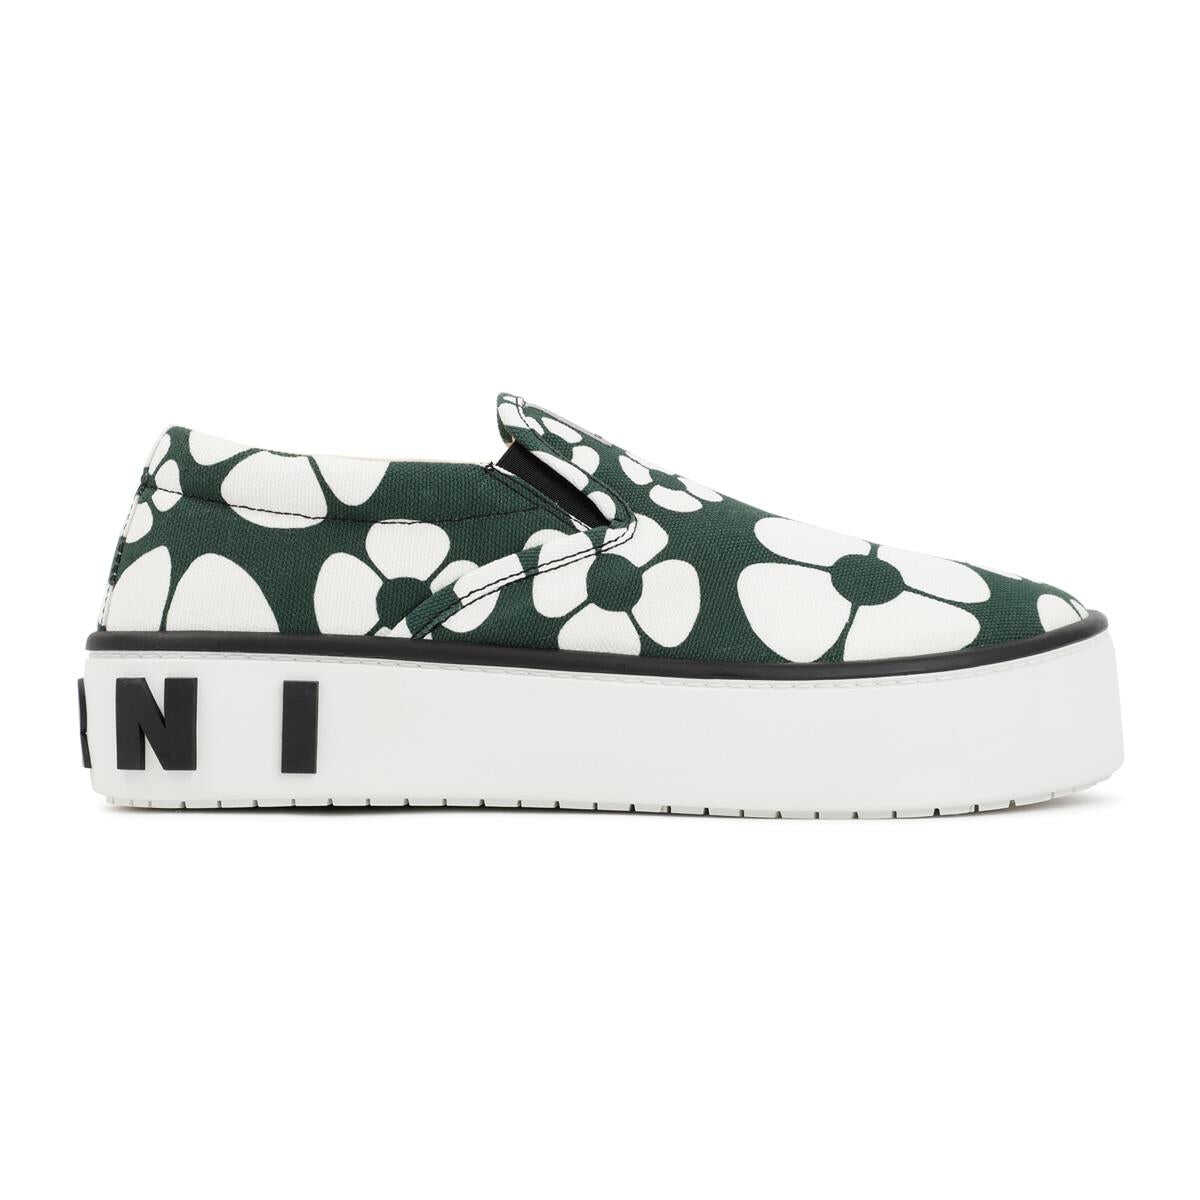 CARHARTT WIP X MARNI CARHARTT WIP X MARNI PAW SLIP ON SHOES Green